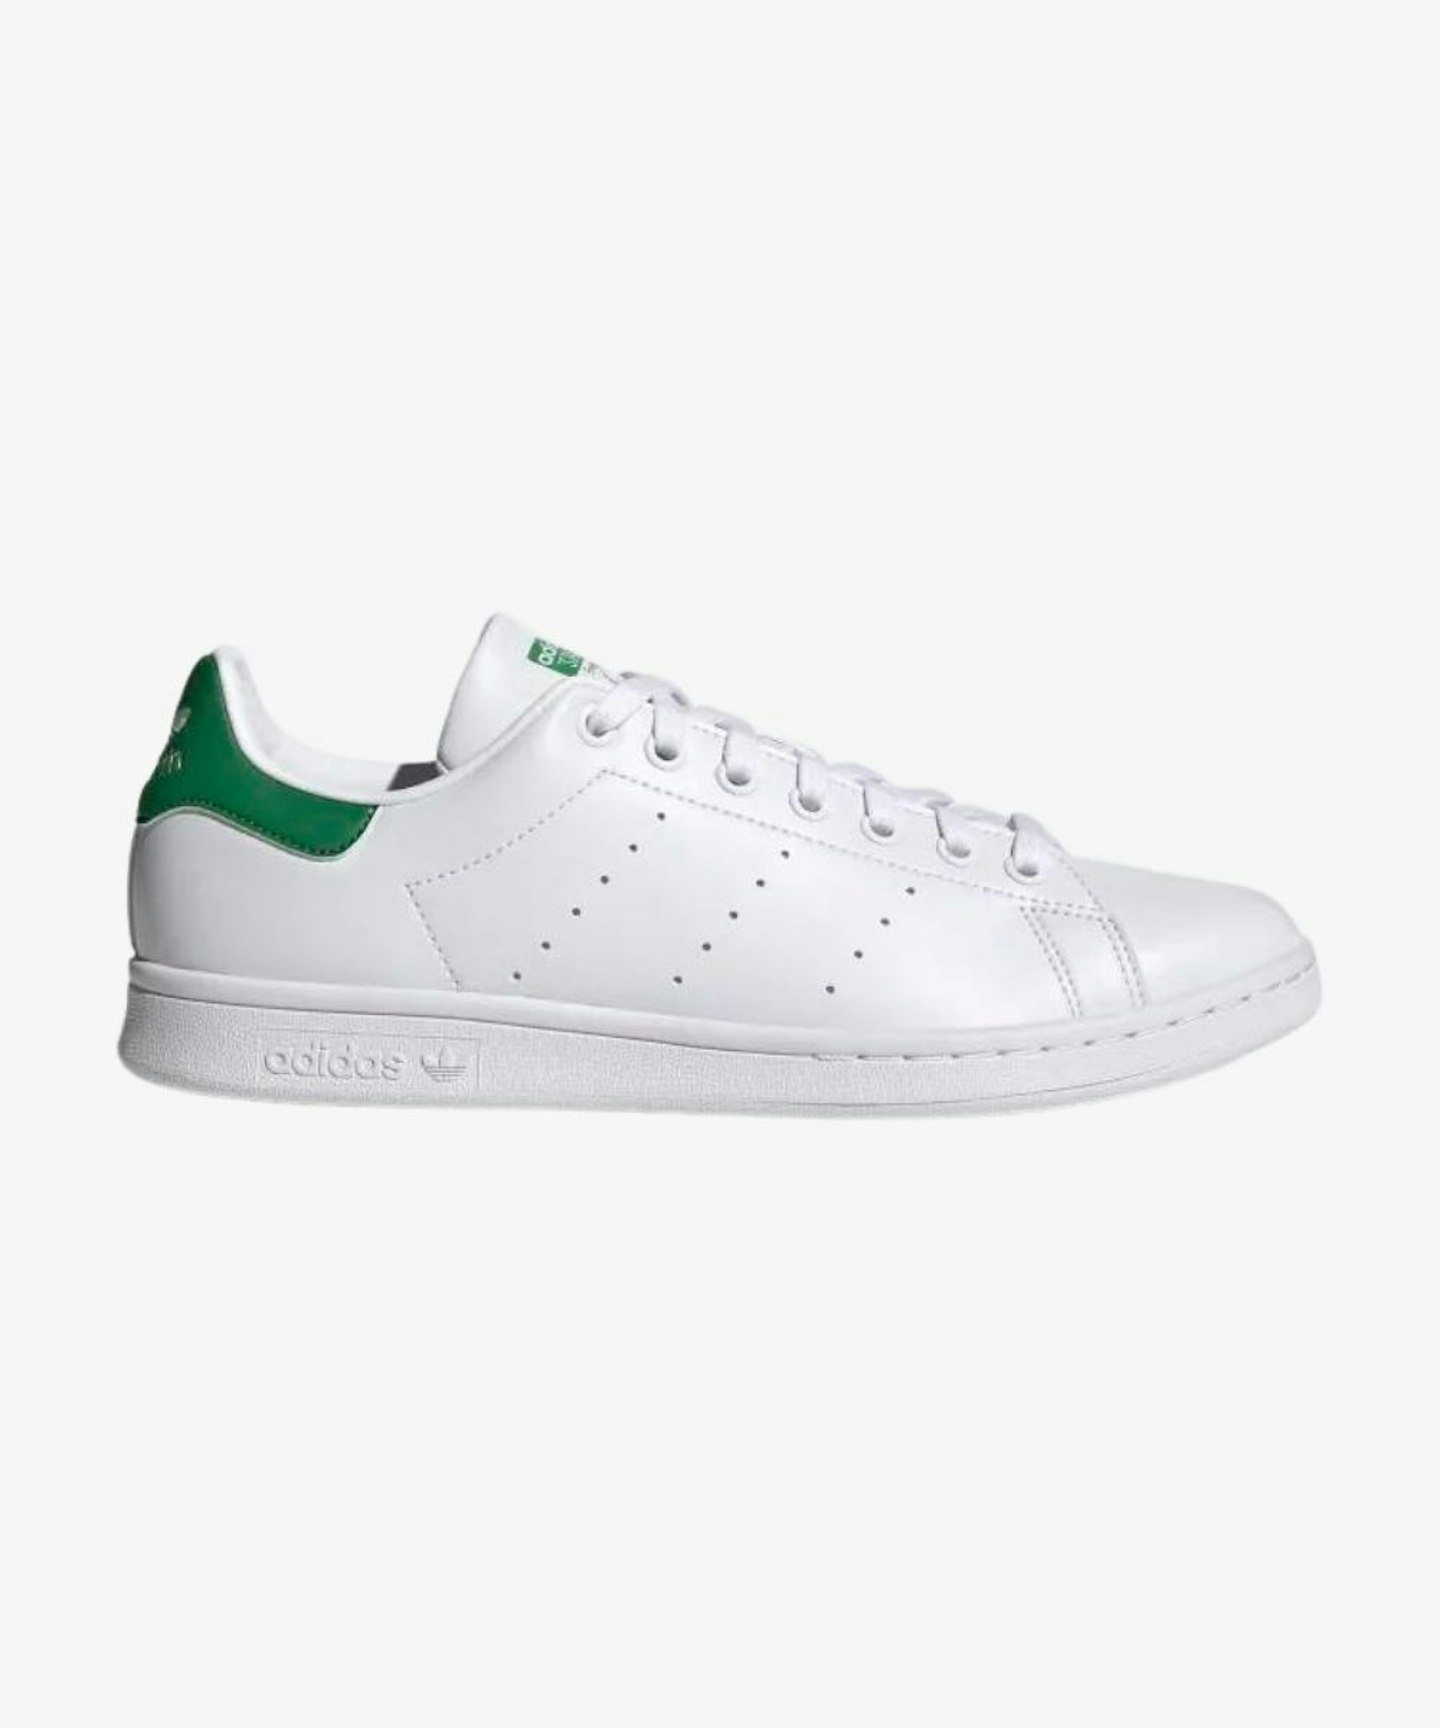 Adidas Stan Smith Shoes, £75